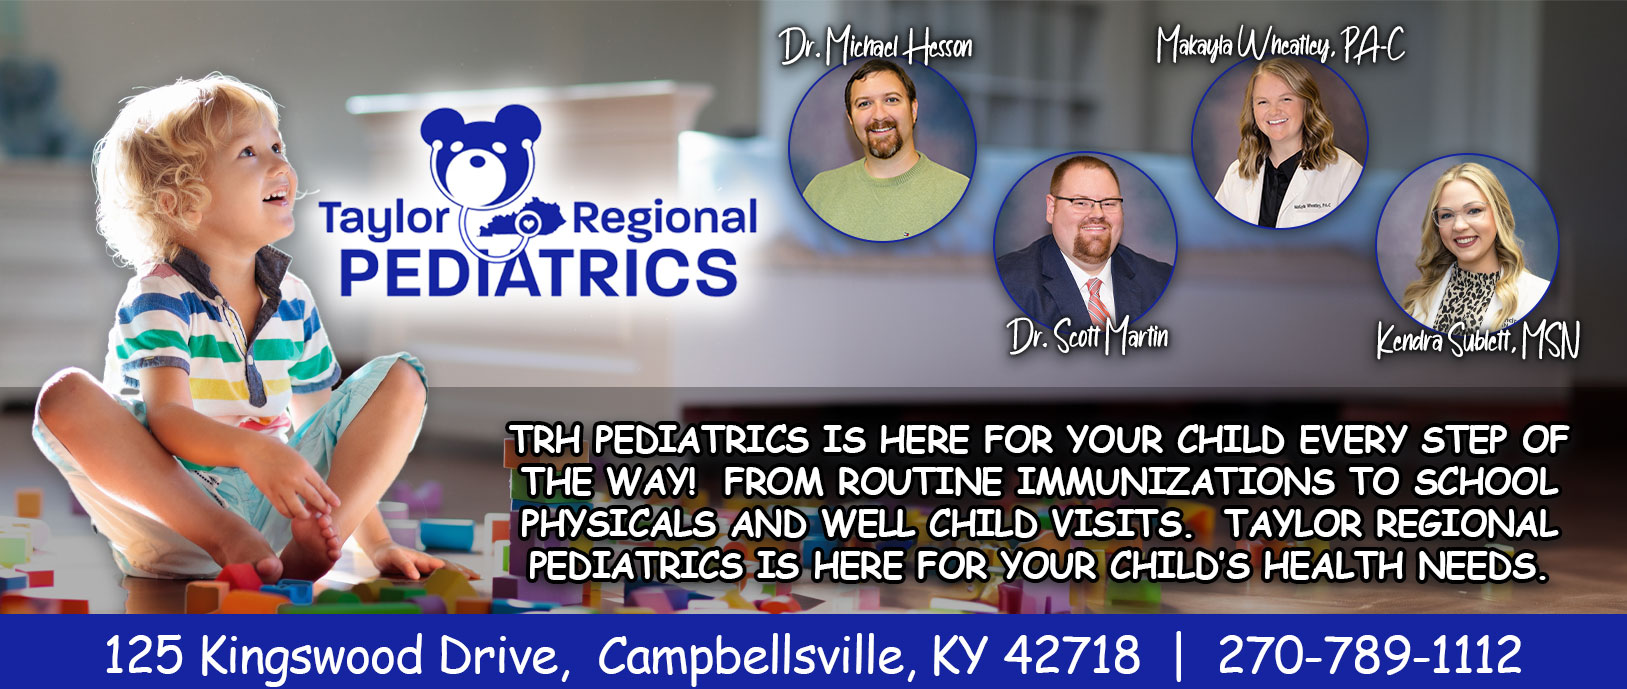 Taylor Regional Pediatrics
Dr/ Michael Hesson
Dr. Scott Martin 
Makayla Wheatley, PA=C

TRH PEDIATRICS IS HERE FOR YOUR CHILD EVERY STEP OF THE WAY! FROM ROUTINE IMMUNIZATIONS TO SCHOOL PHYISICALS AND WELL CHILD VISITS. TAYLOR REGIONAL PEDIATICS IS HERE FOR YOUR CHILD'S HEALTH NEEDS.

125 Kingswood Drive
Campbellsville, KY 42718
270-789-1112